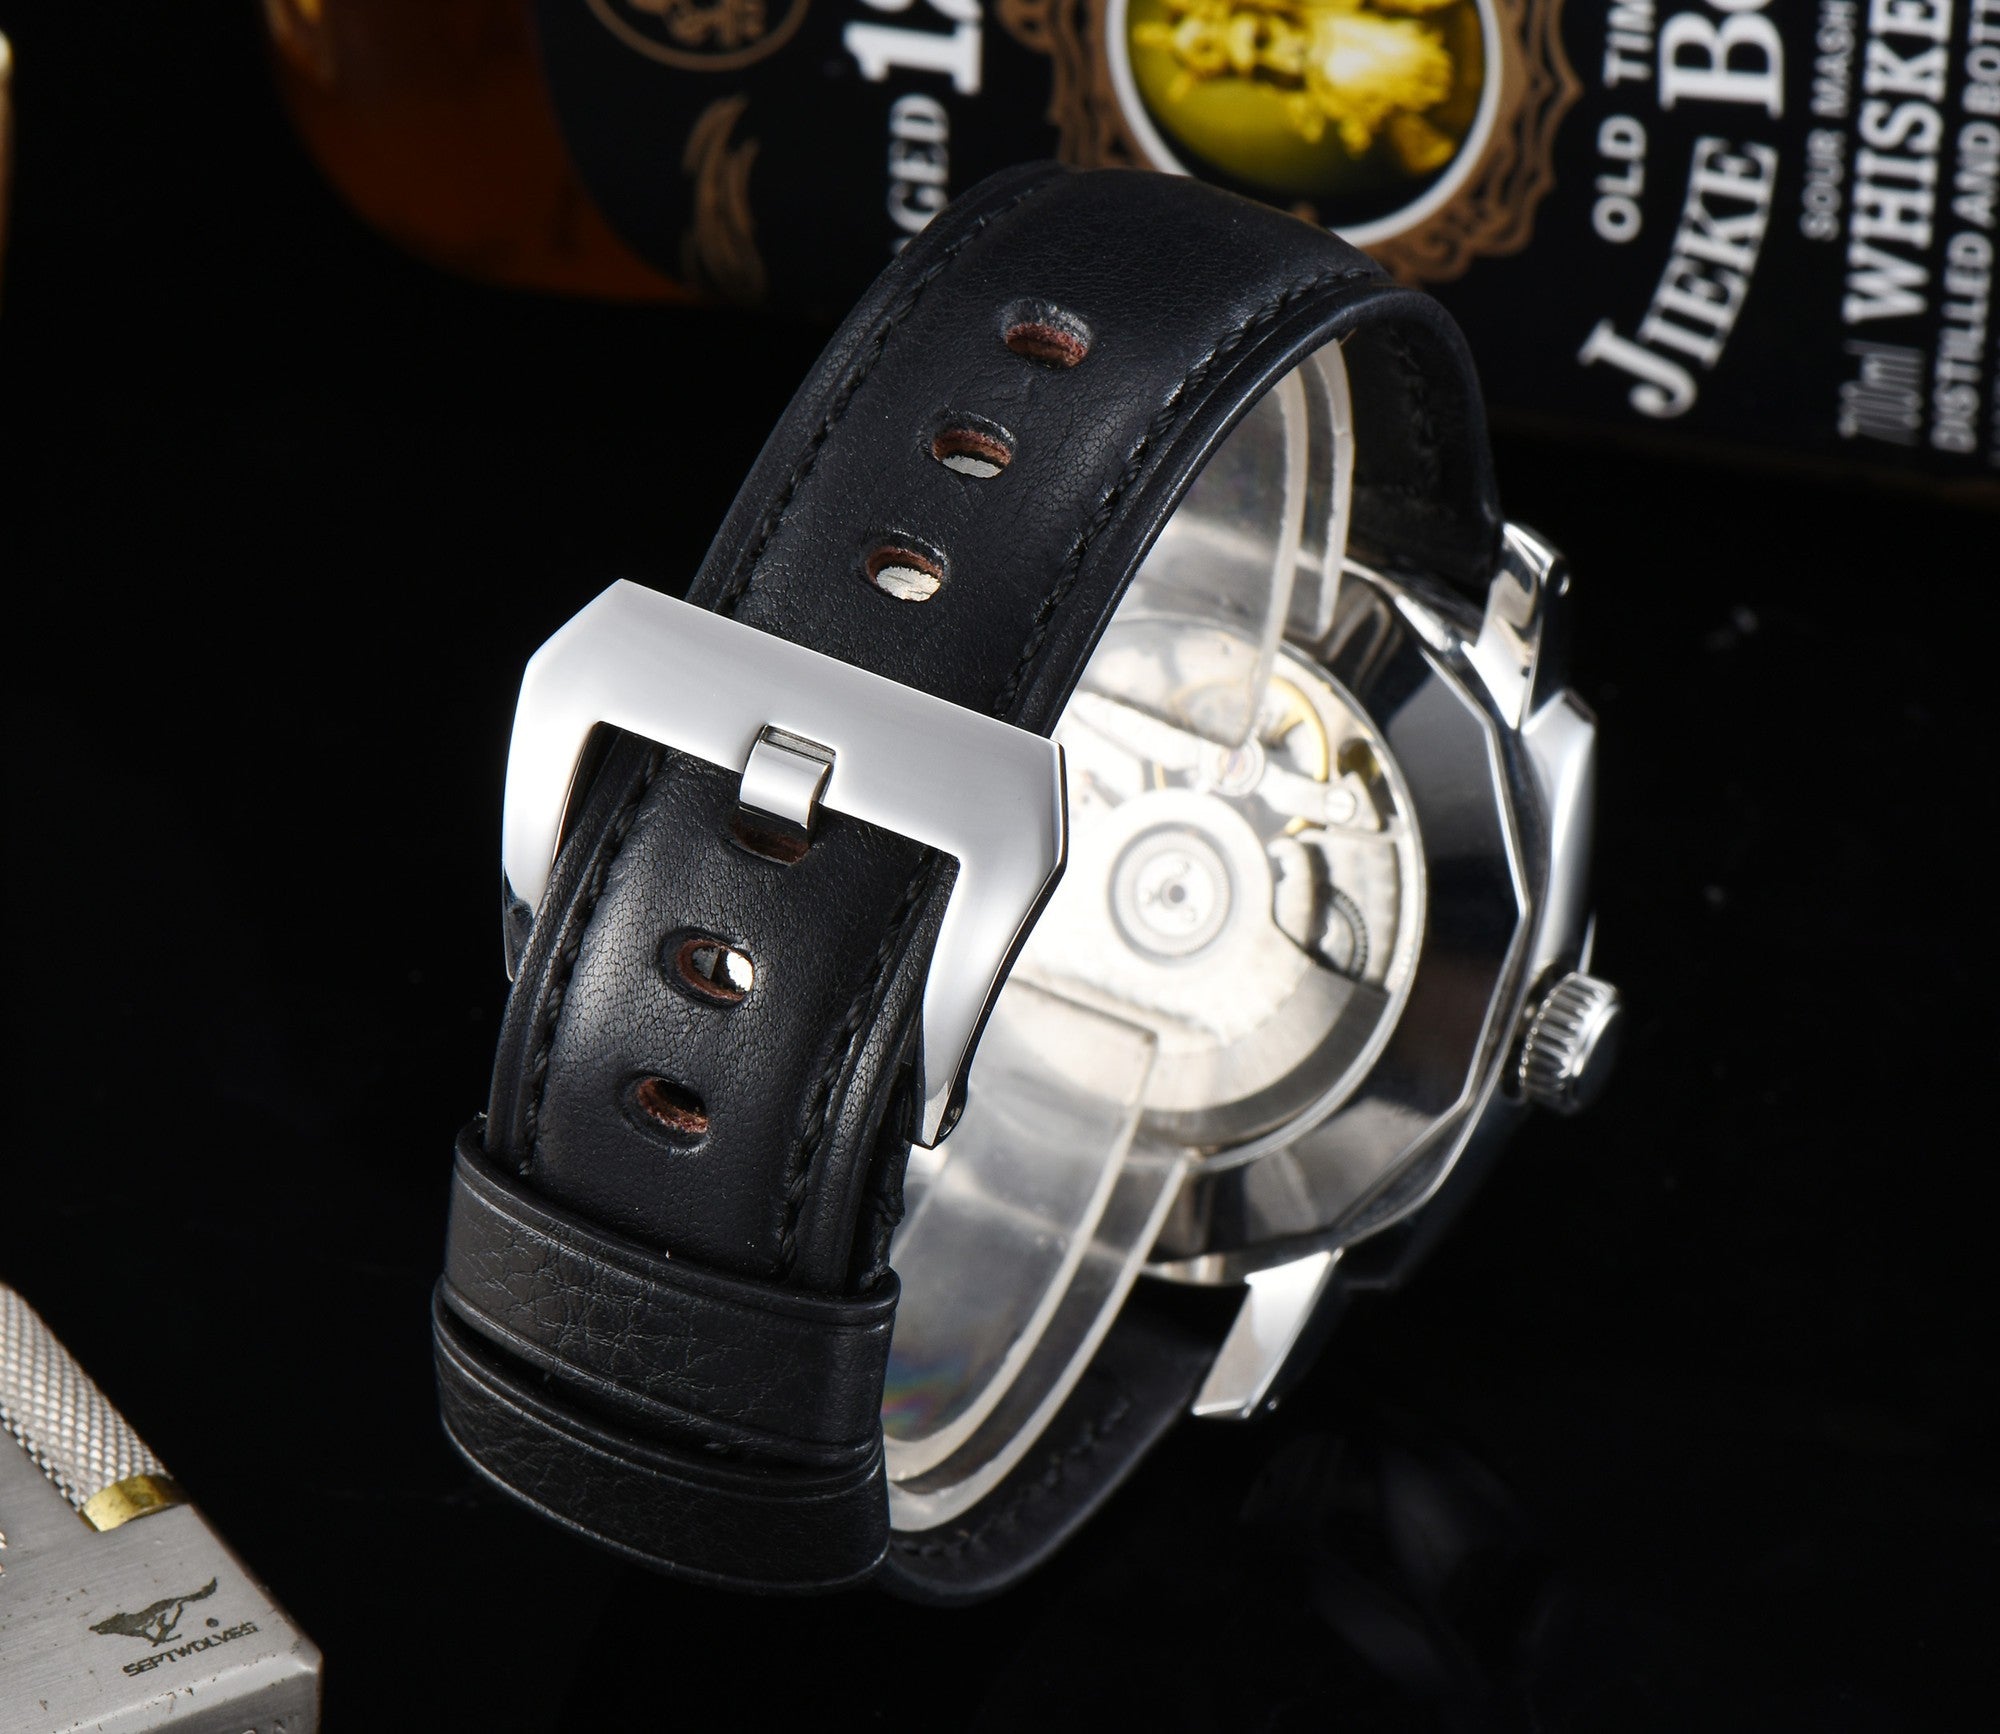 Parnis Military 44mm Self-winding Watch Men's Leather Belt / Suit Popular Luxury Brand / Waterproof / Recommended P24